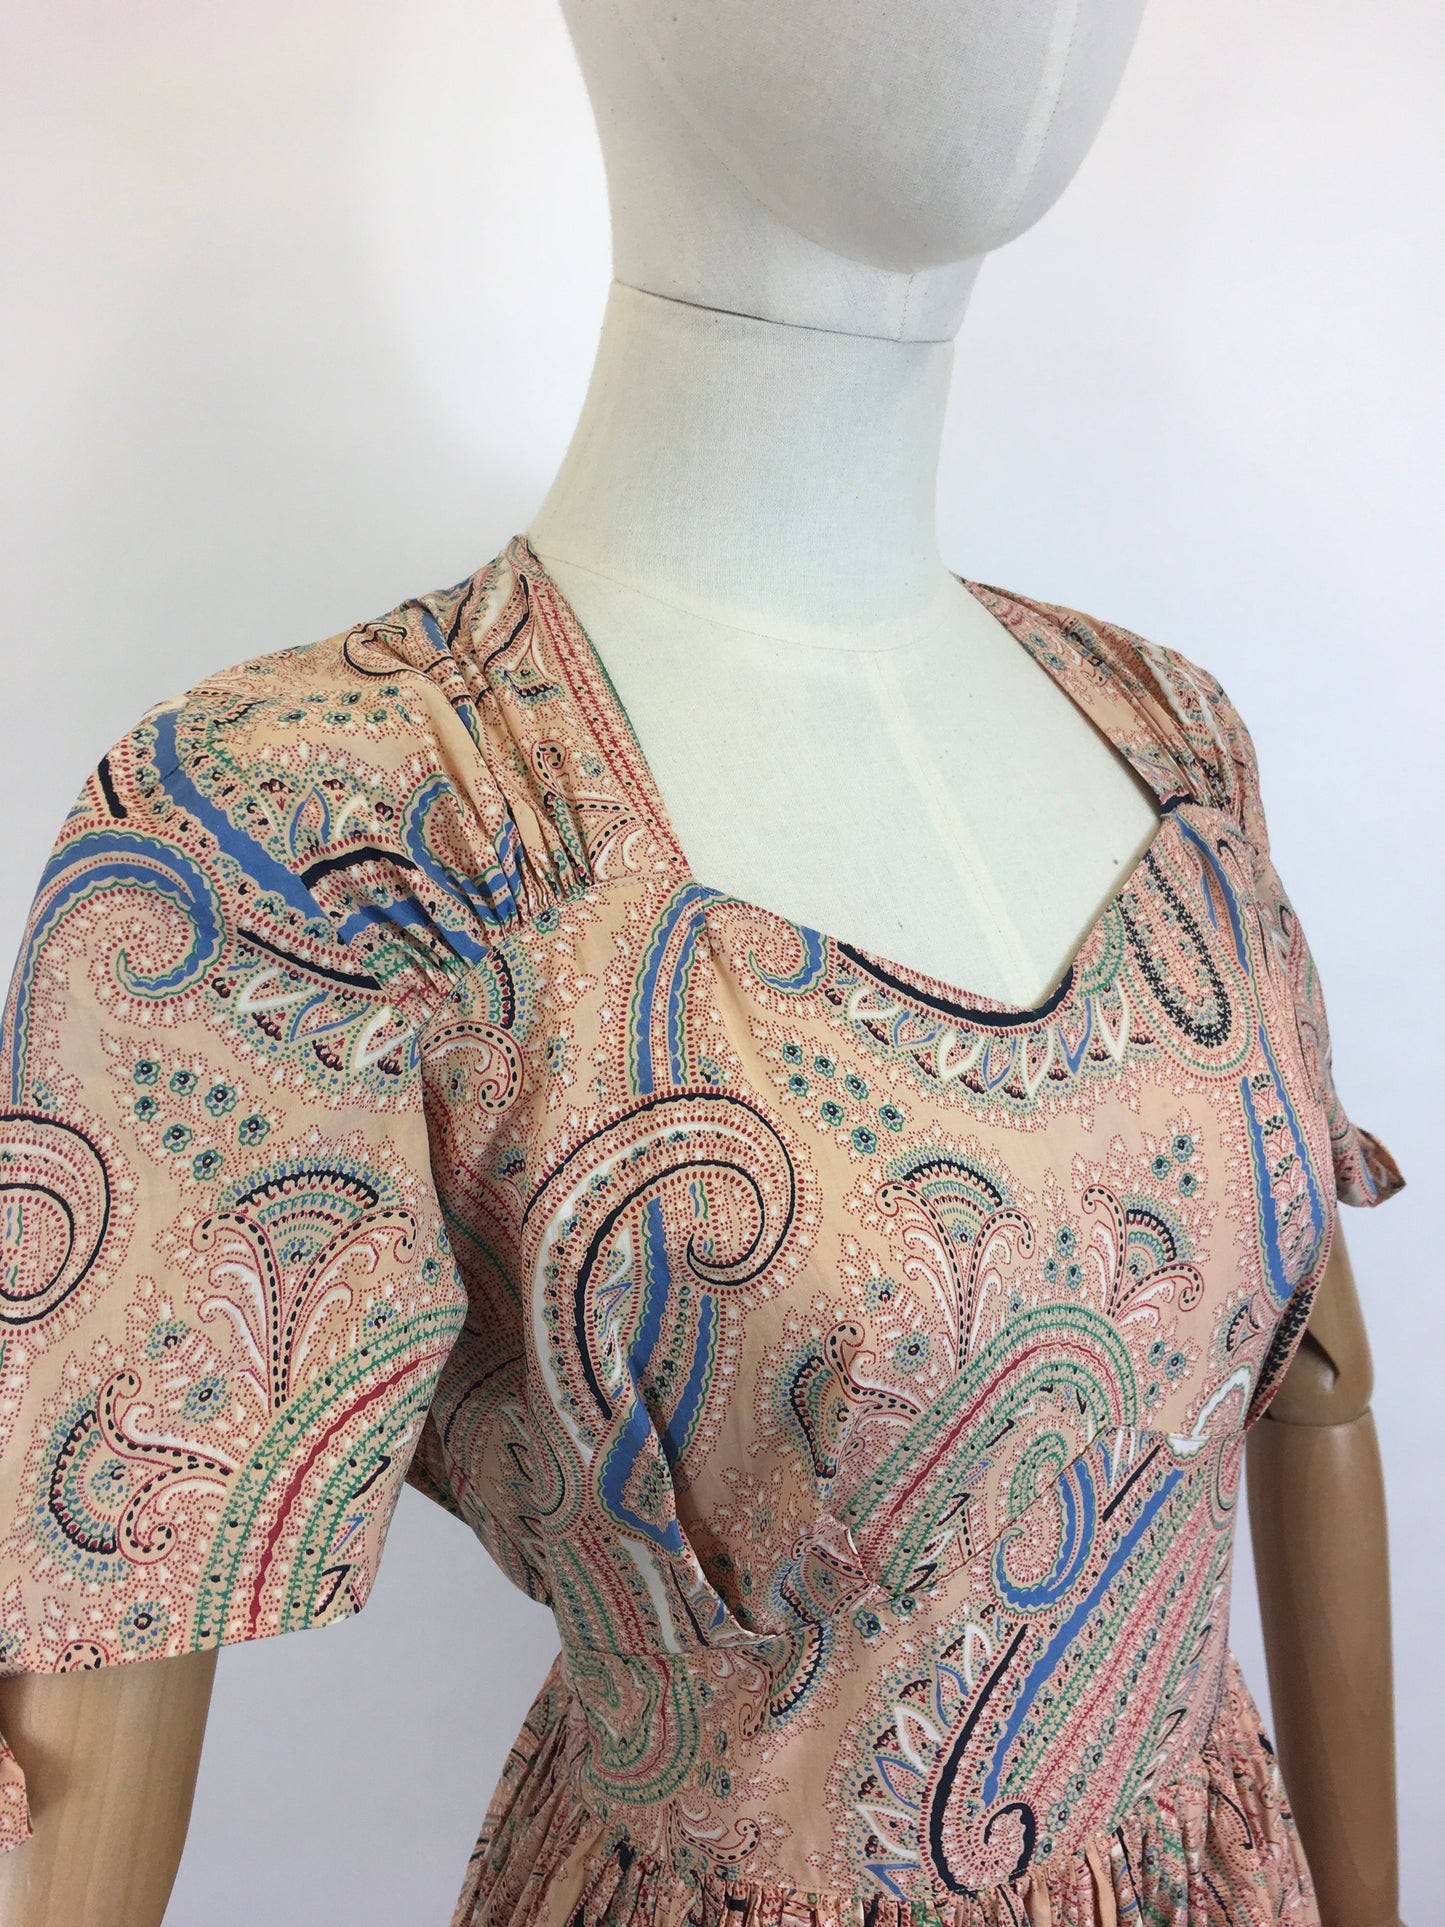 Original 1940’s Darling Day Dress - In A Very Pretty Paisley Print Cotton